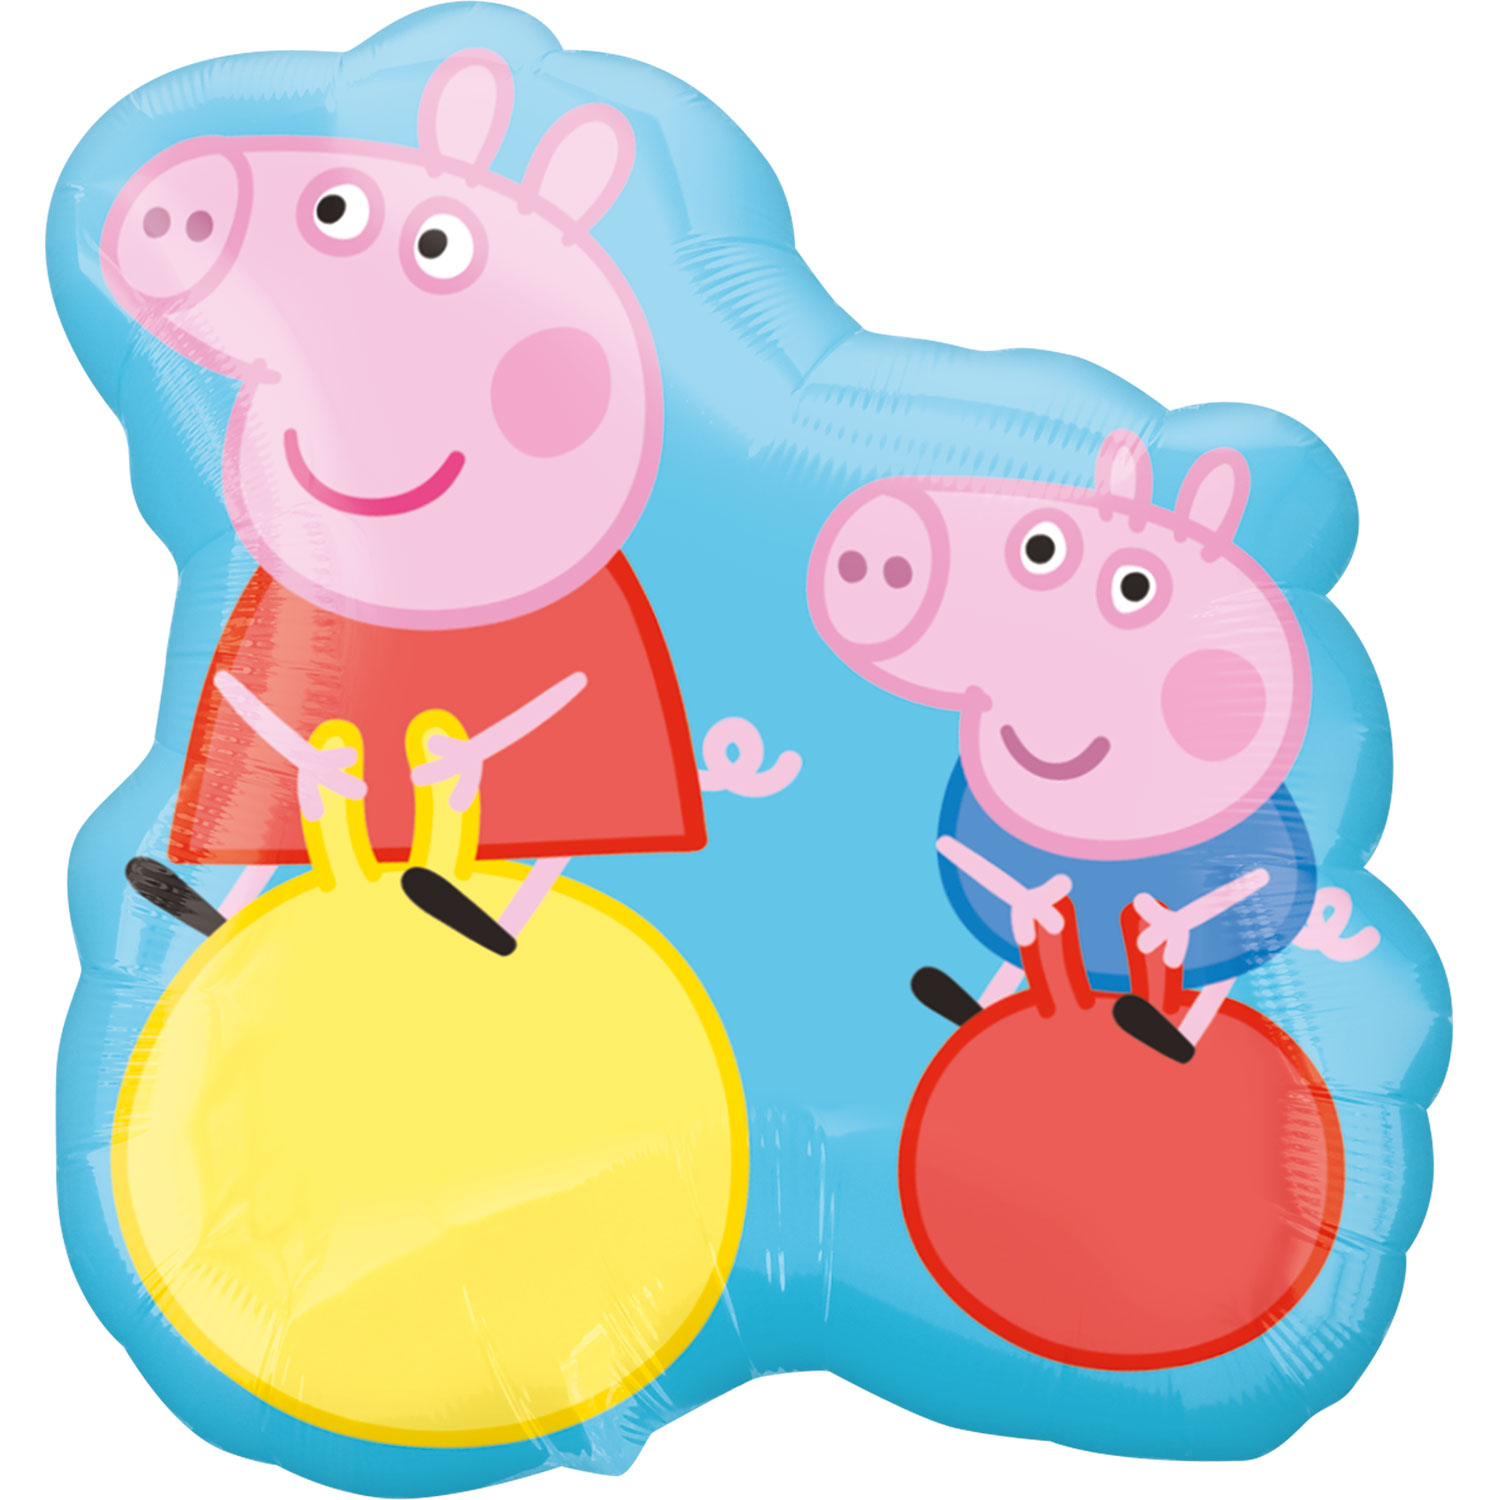 Space　Girl　and　Balloon　George　Store　Hopper　Party　Peppa　Pig